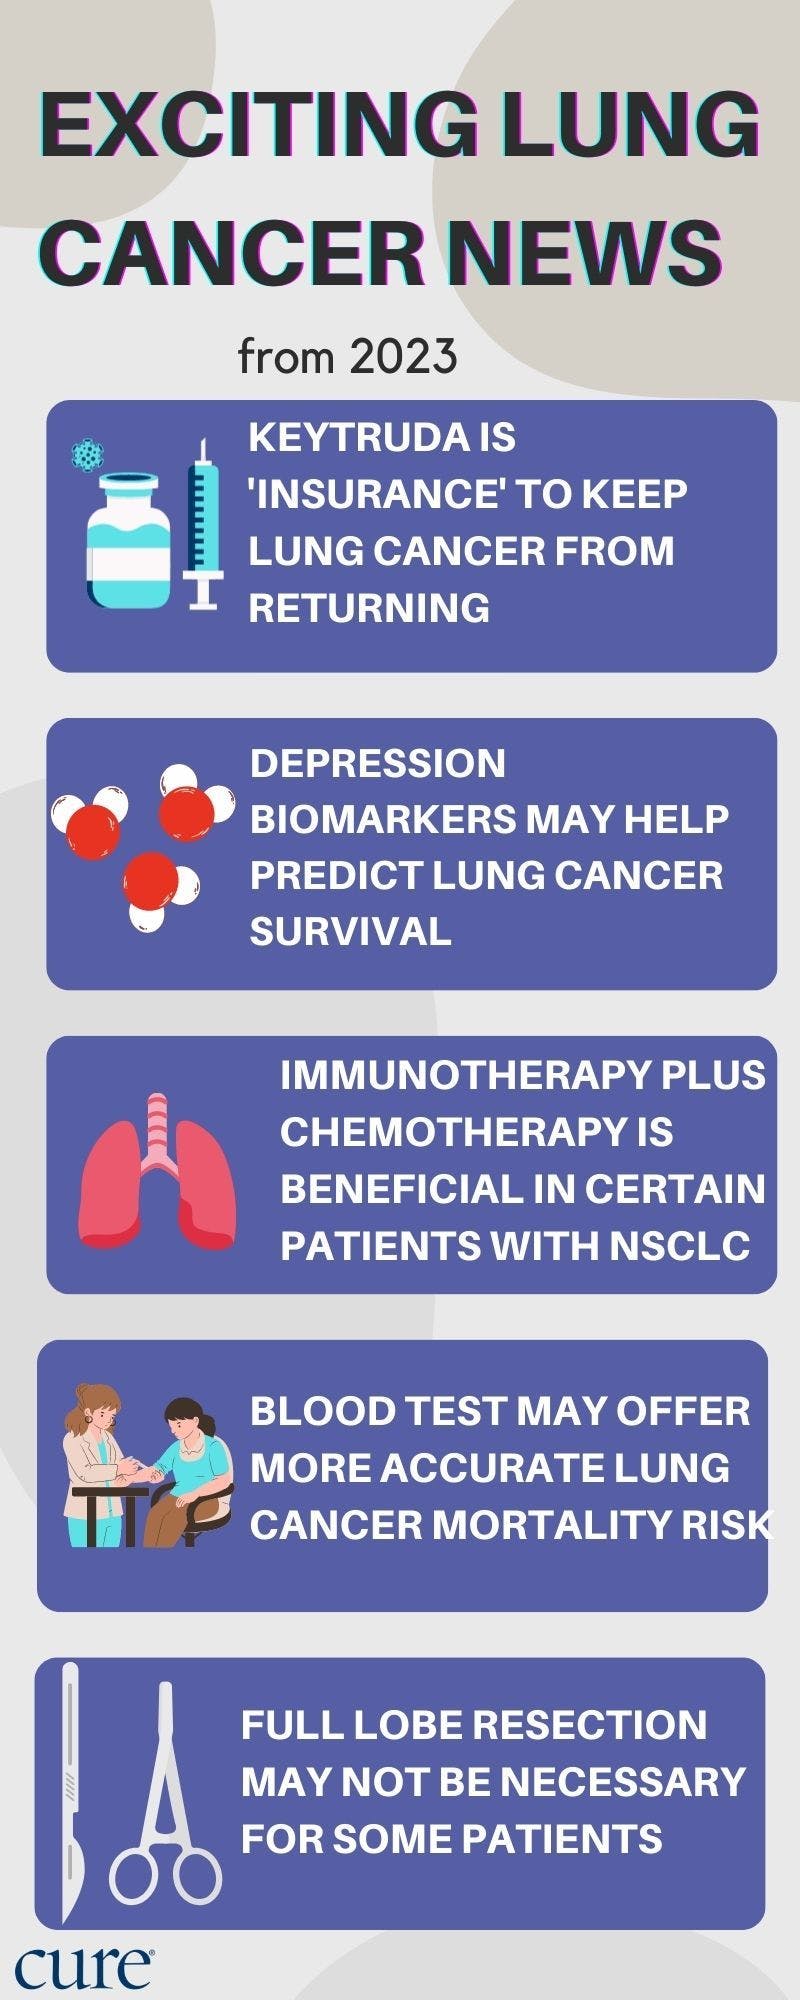 List of exciting lung cancer advancements from 2023